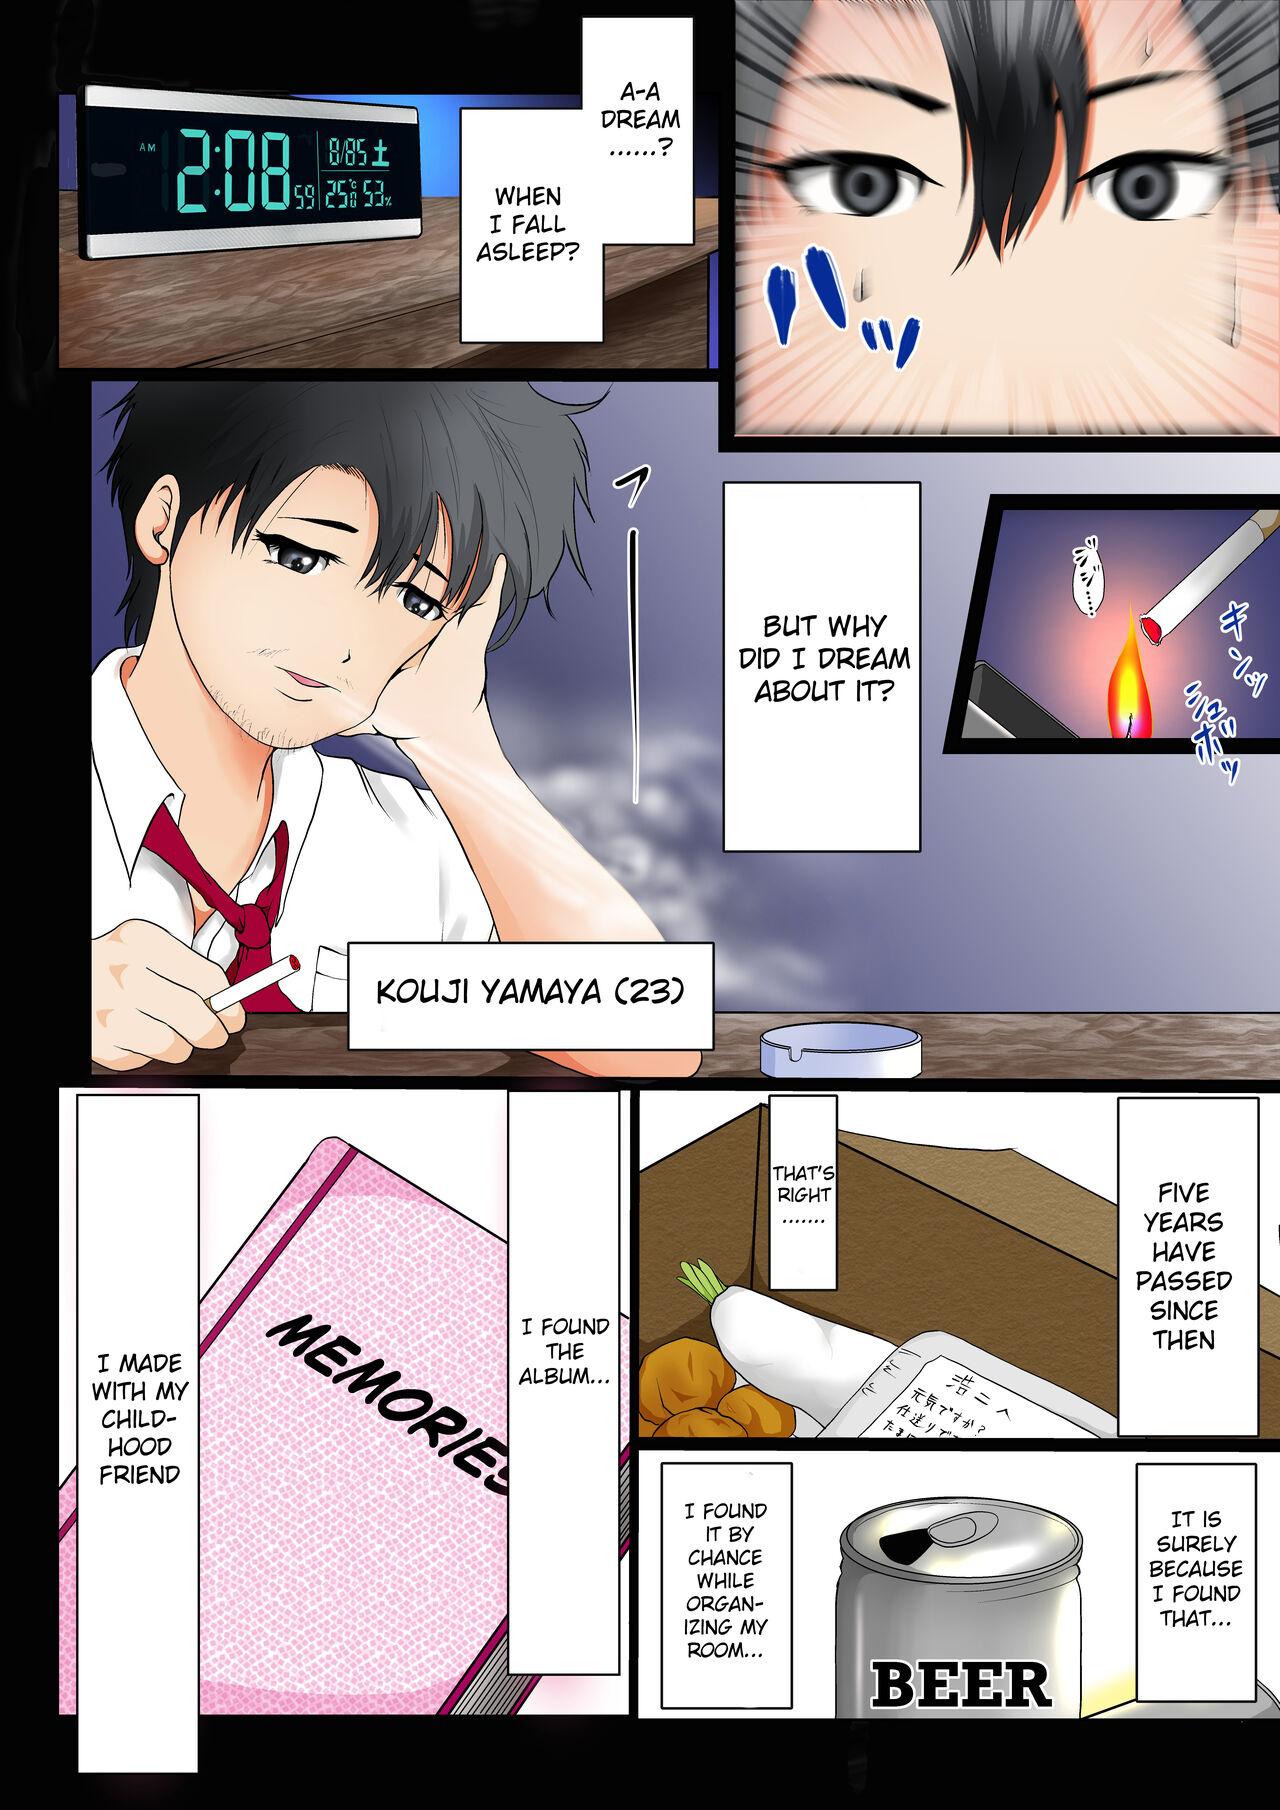 Nude The reason why the bond with my childhood friend is broken so easily - Original Cutie - Page 5